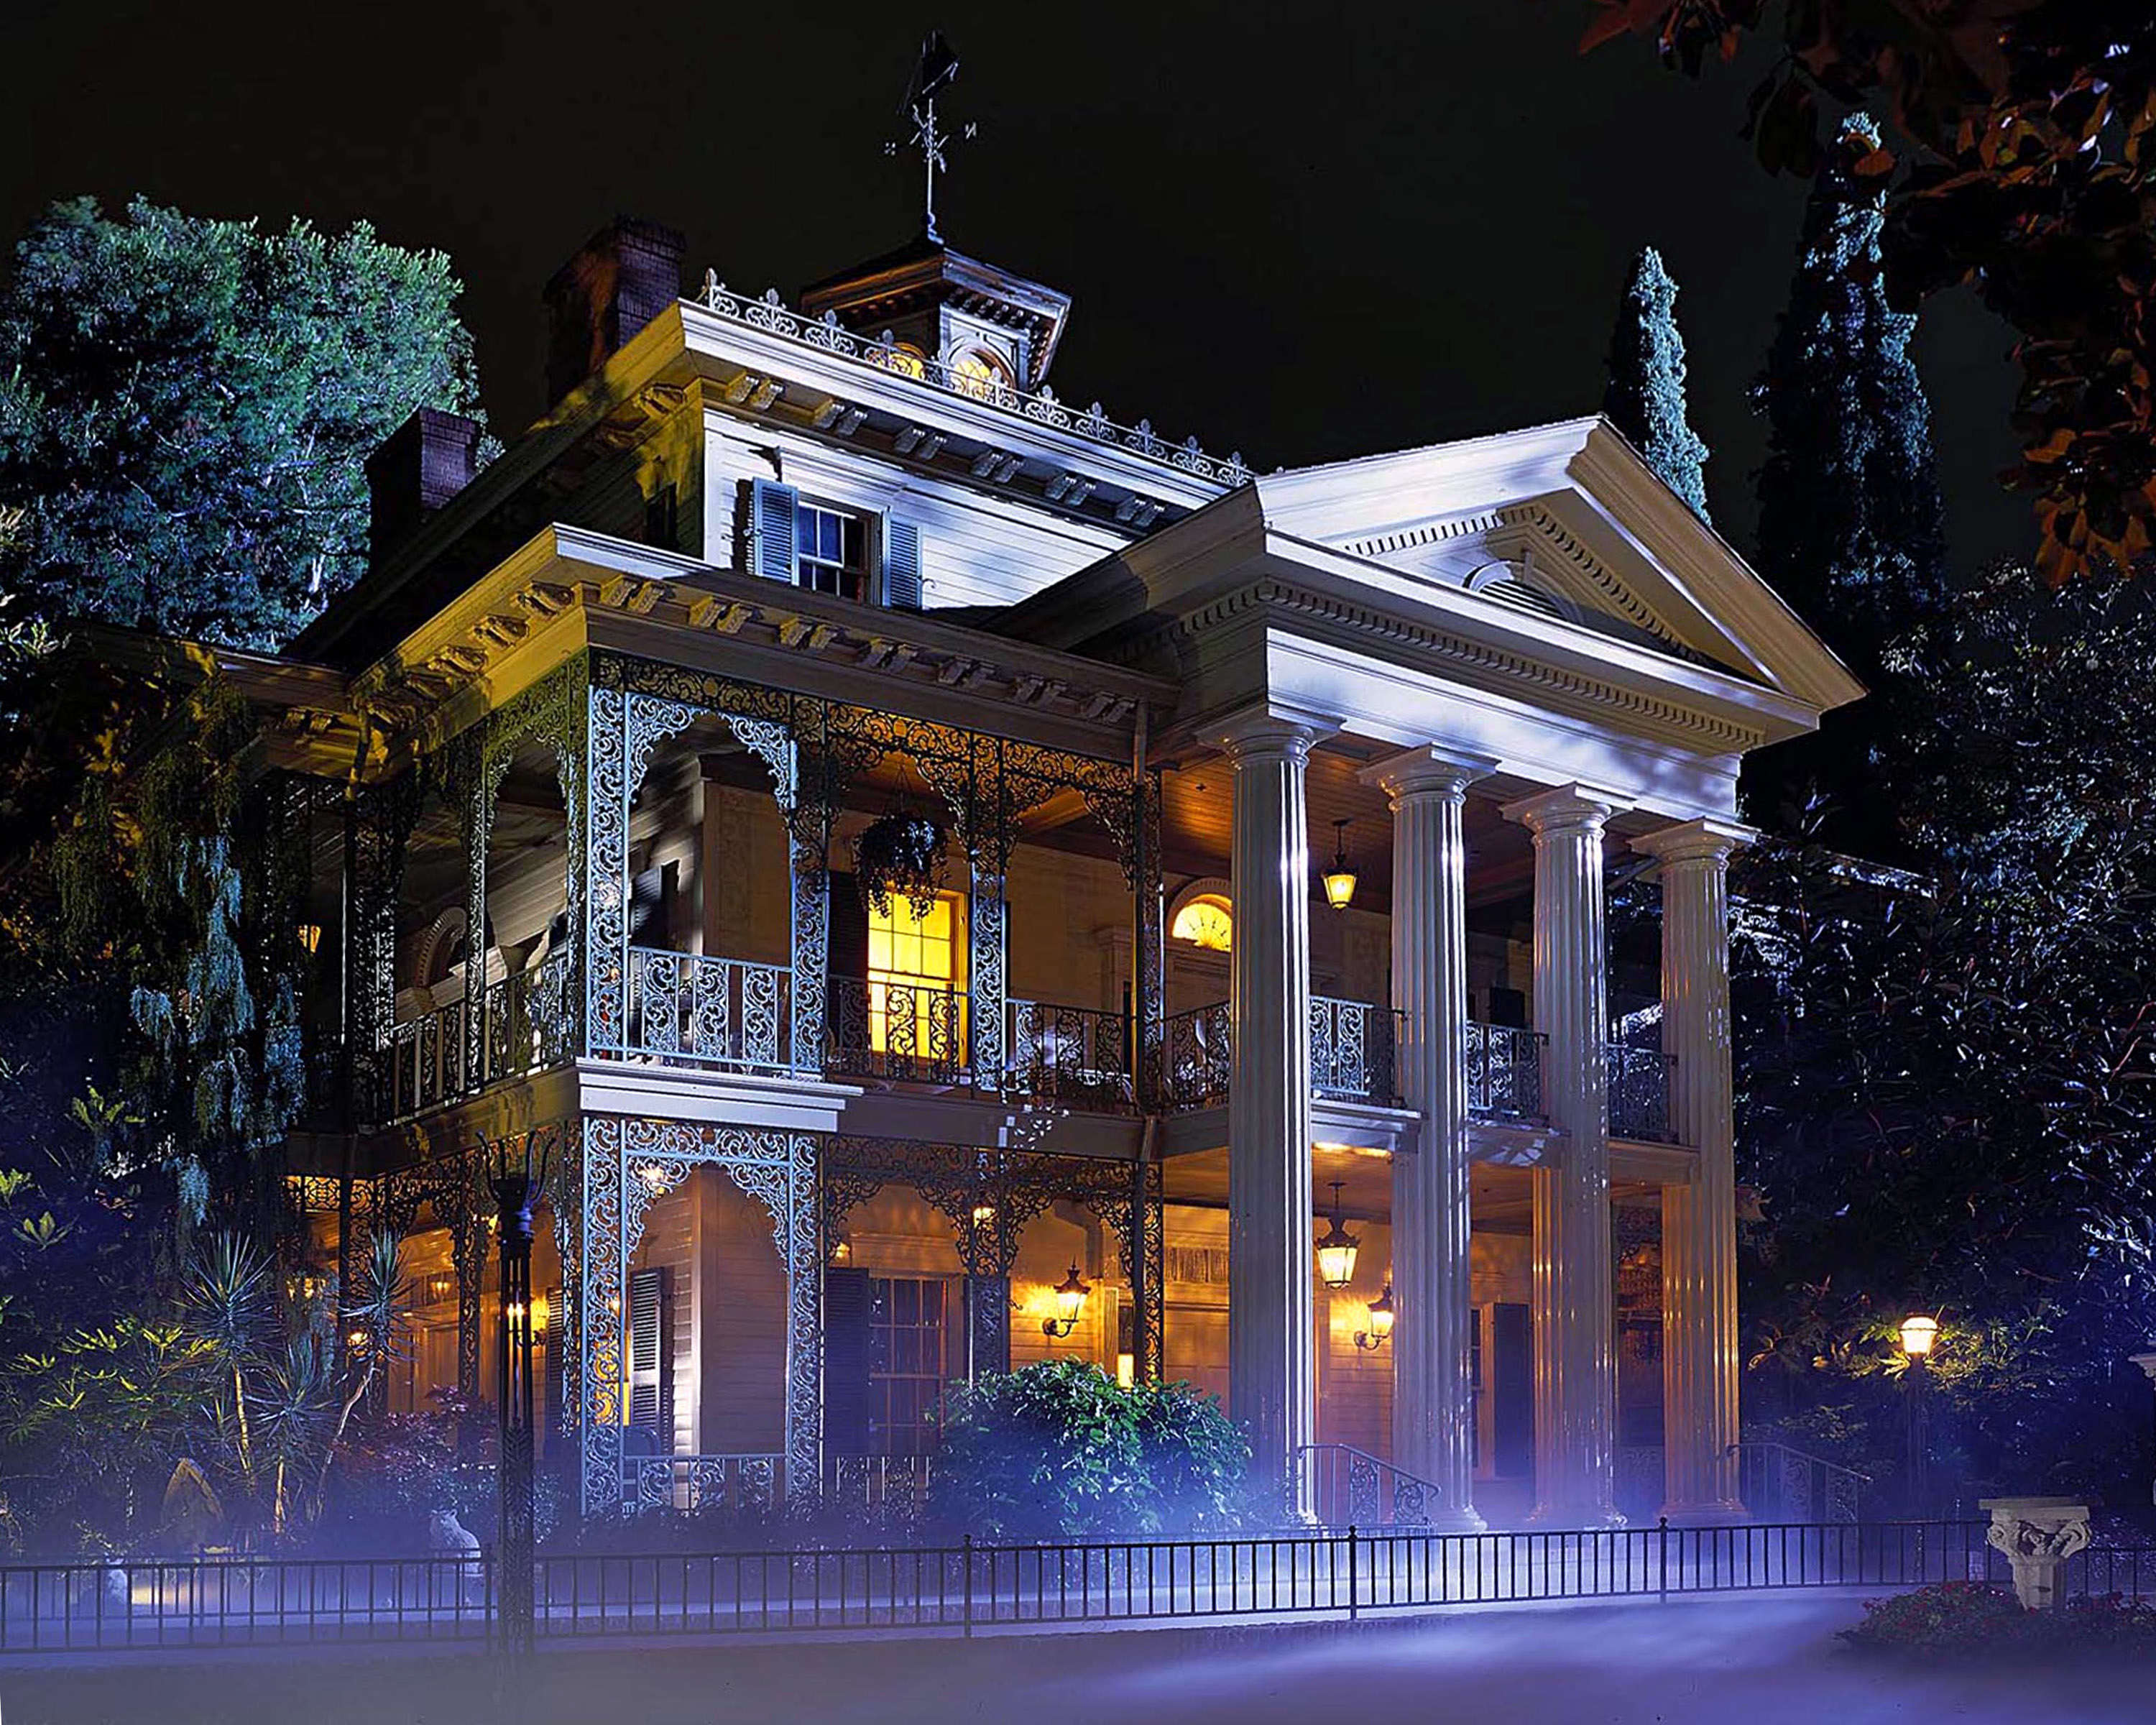 A foggy evening in front of Disneyland's Haunted Mansion